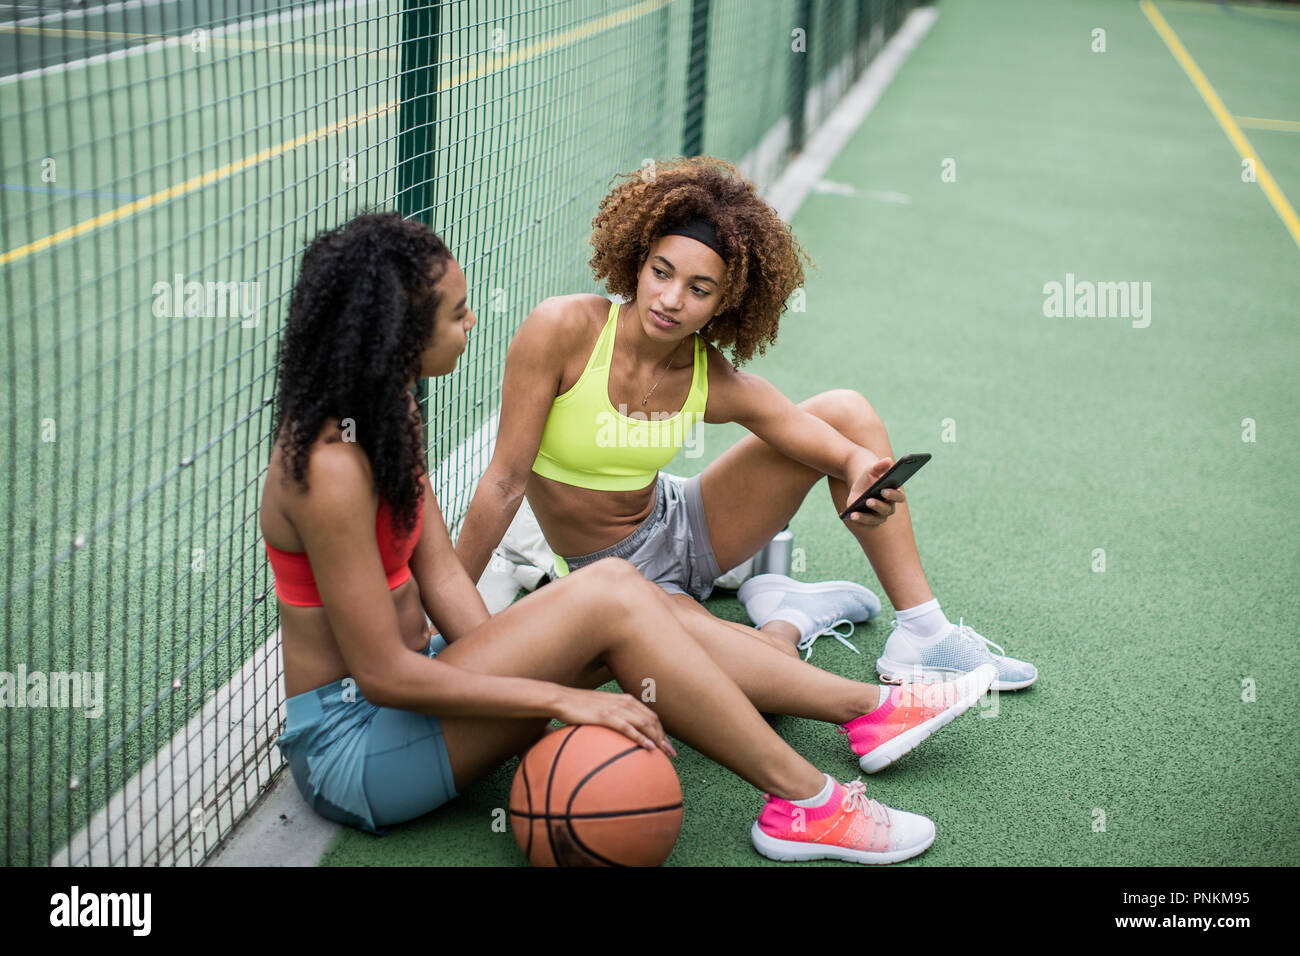 Friends taking a break from training on a basketball court Stock Photo